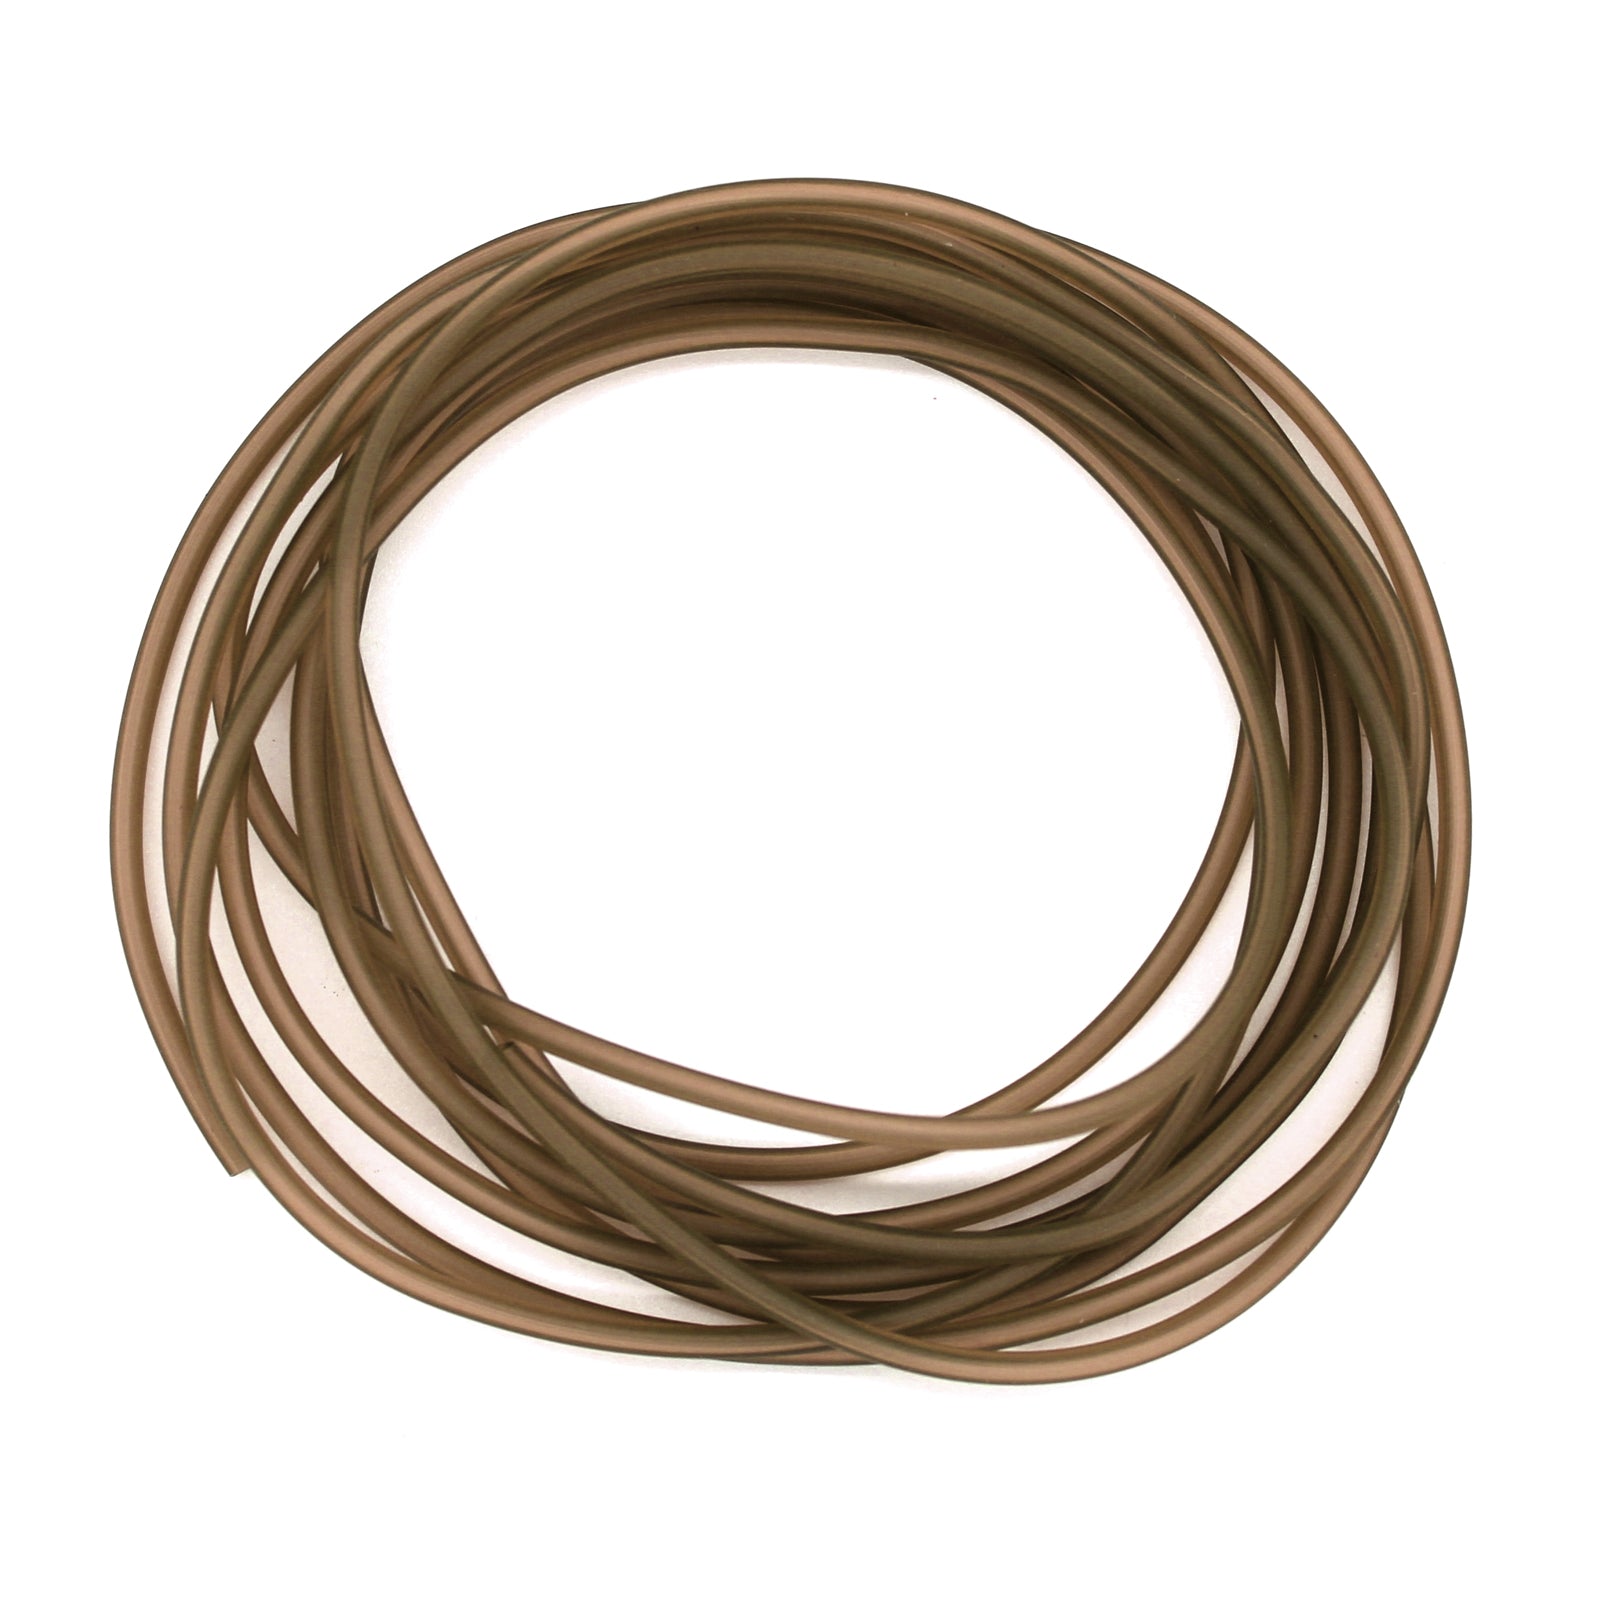 Deception Angling Silicon Tubing for Fishing in Trans Brown